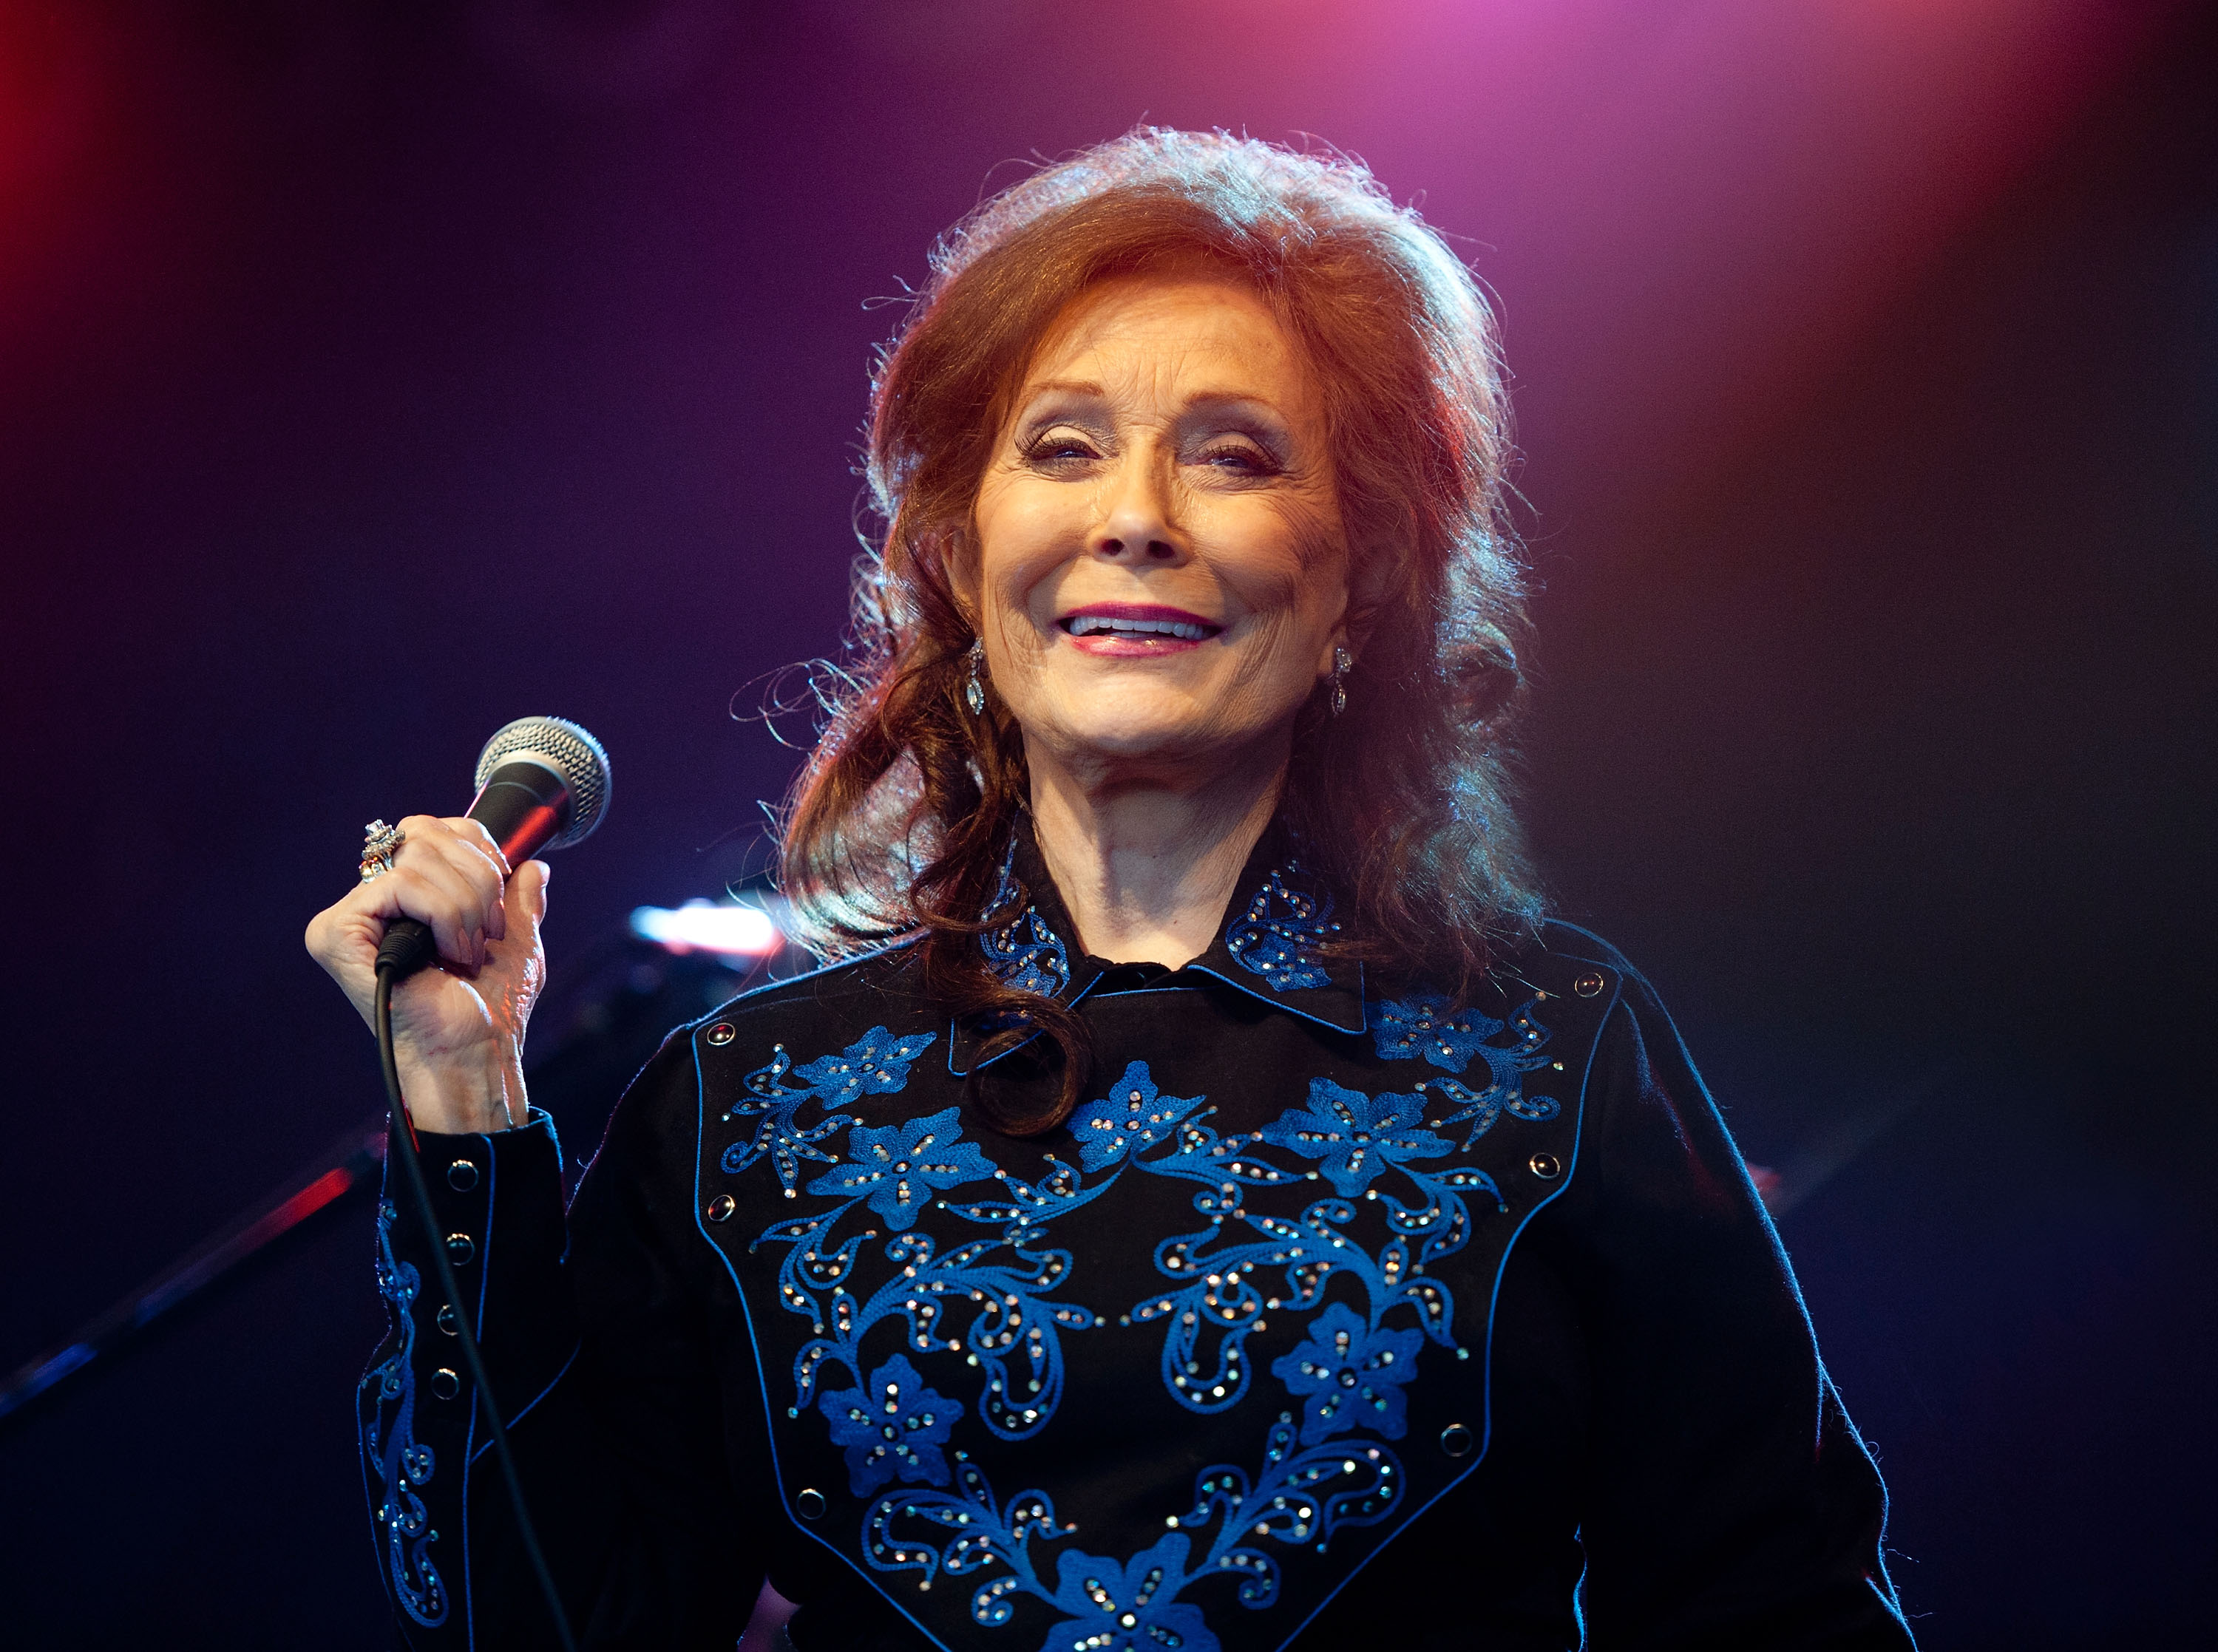 Loretta Lynn performing in Manchester, Tennessee in 2011 | Source: Getty Images